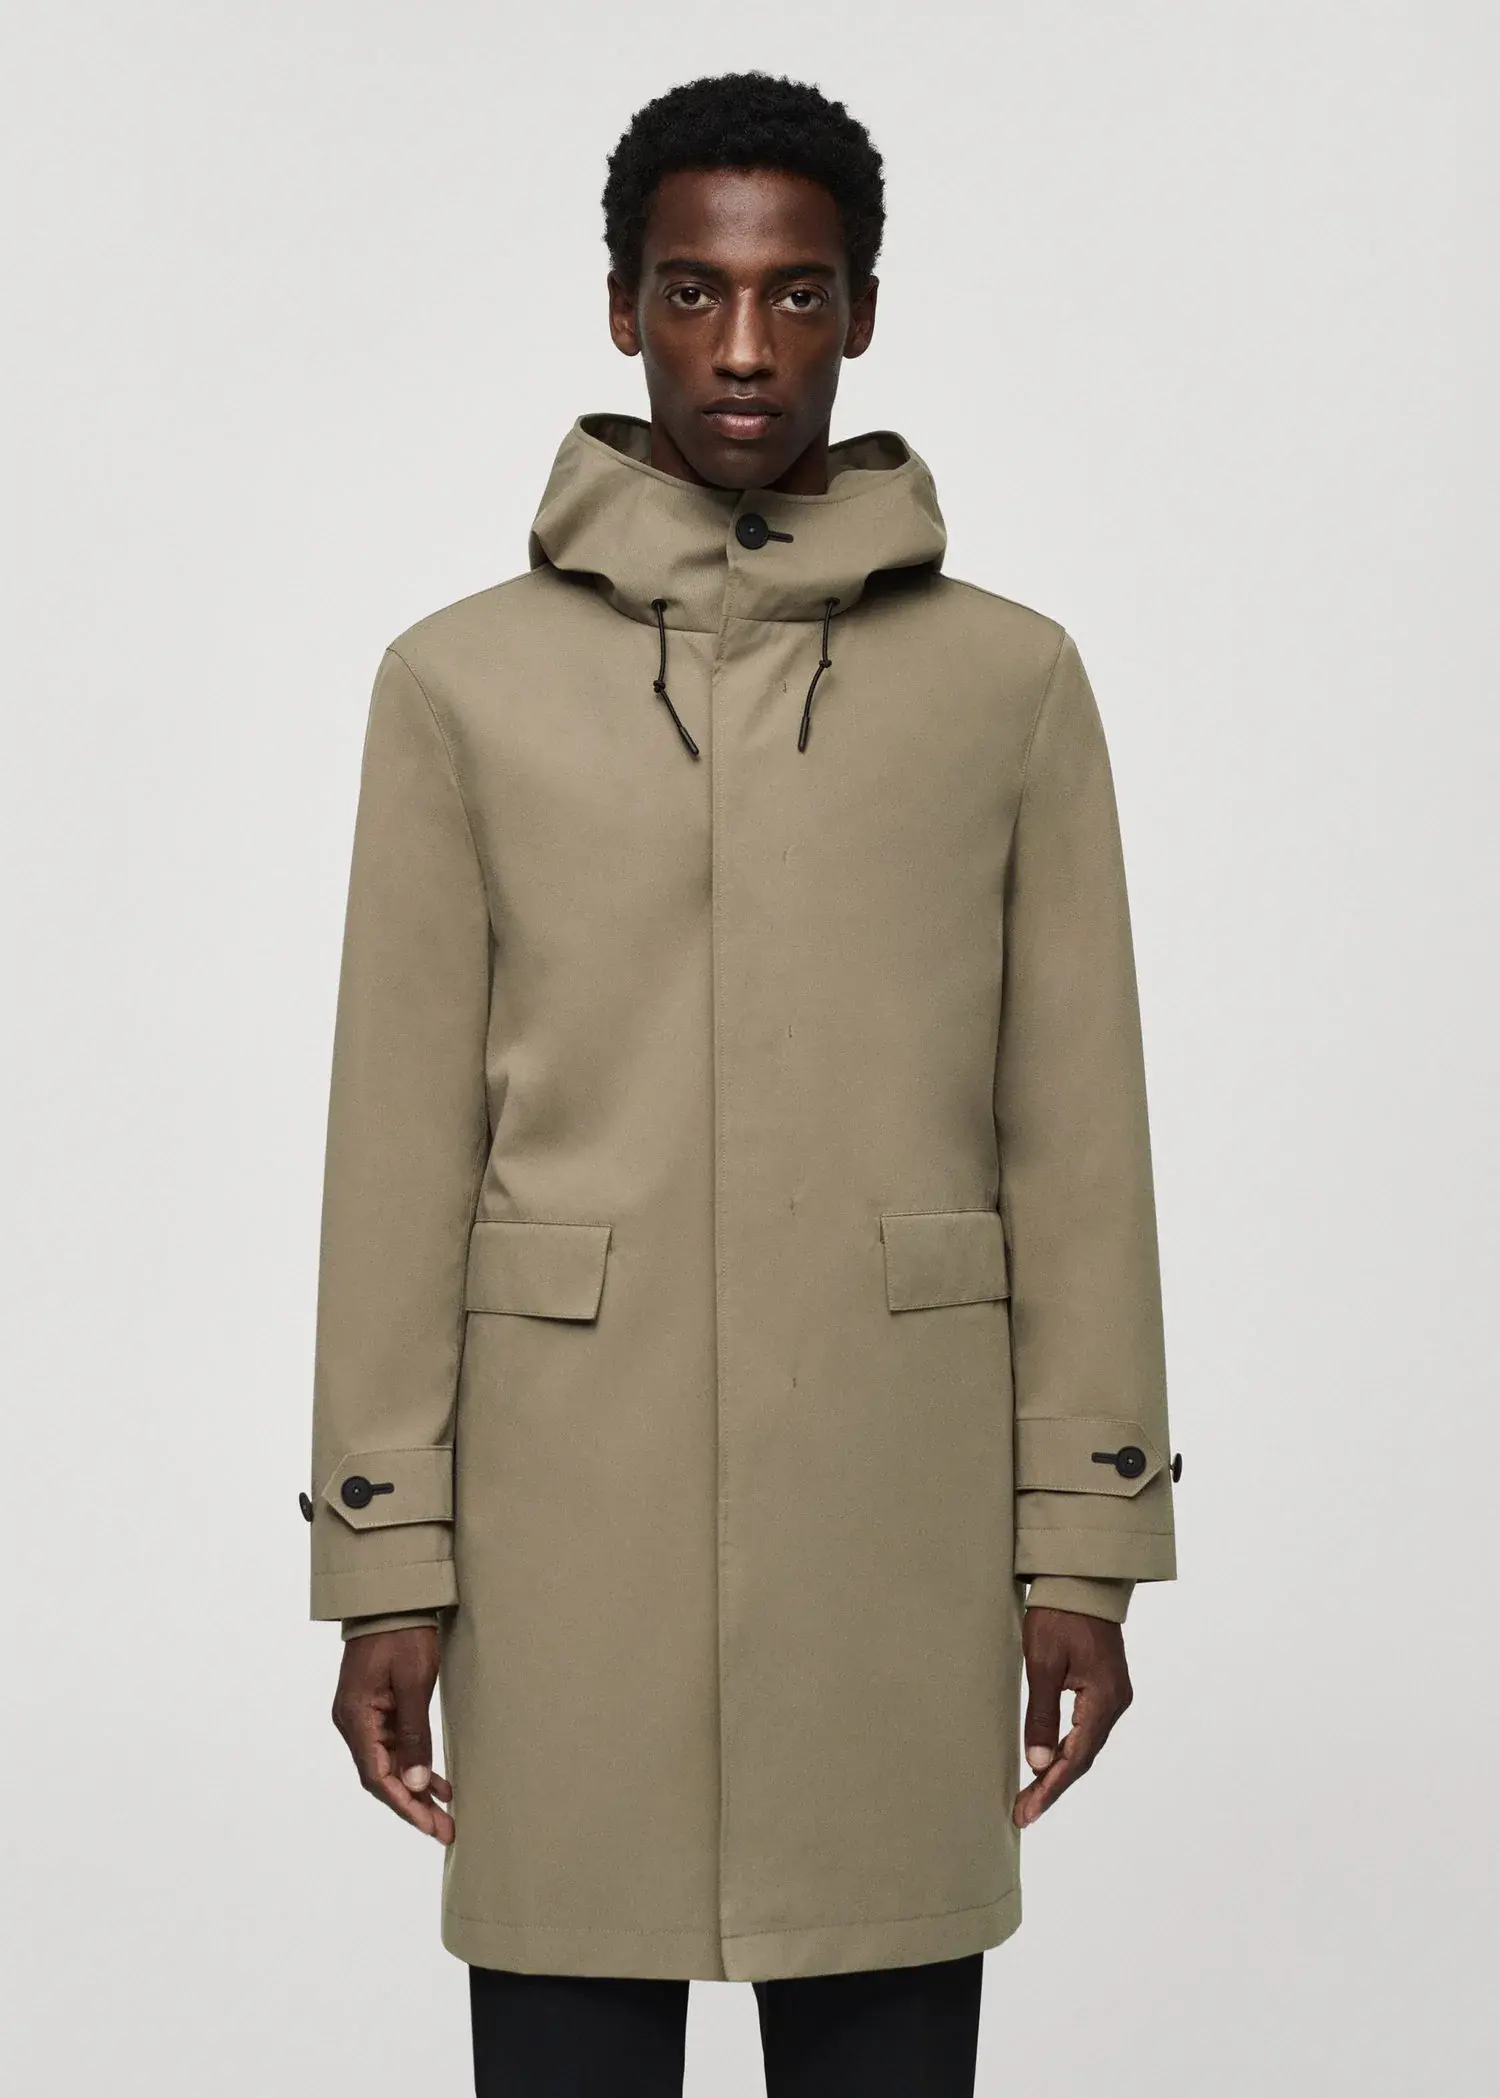 Mango Water-repellent hooded parka. 2